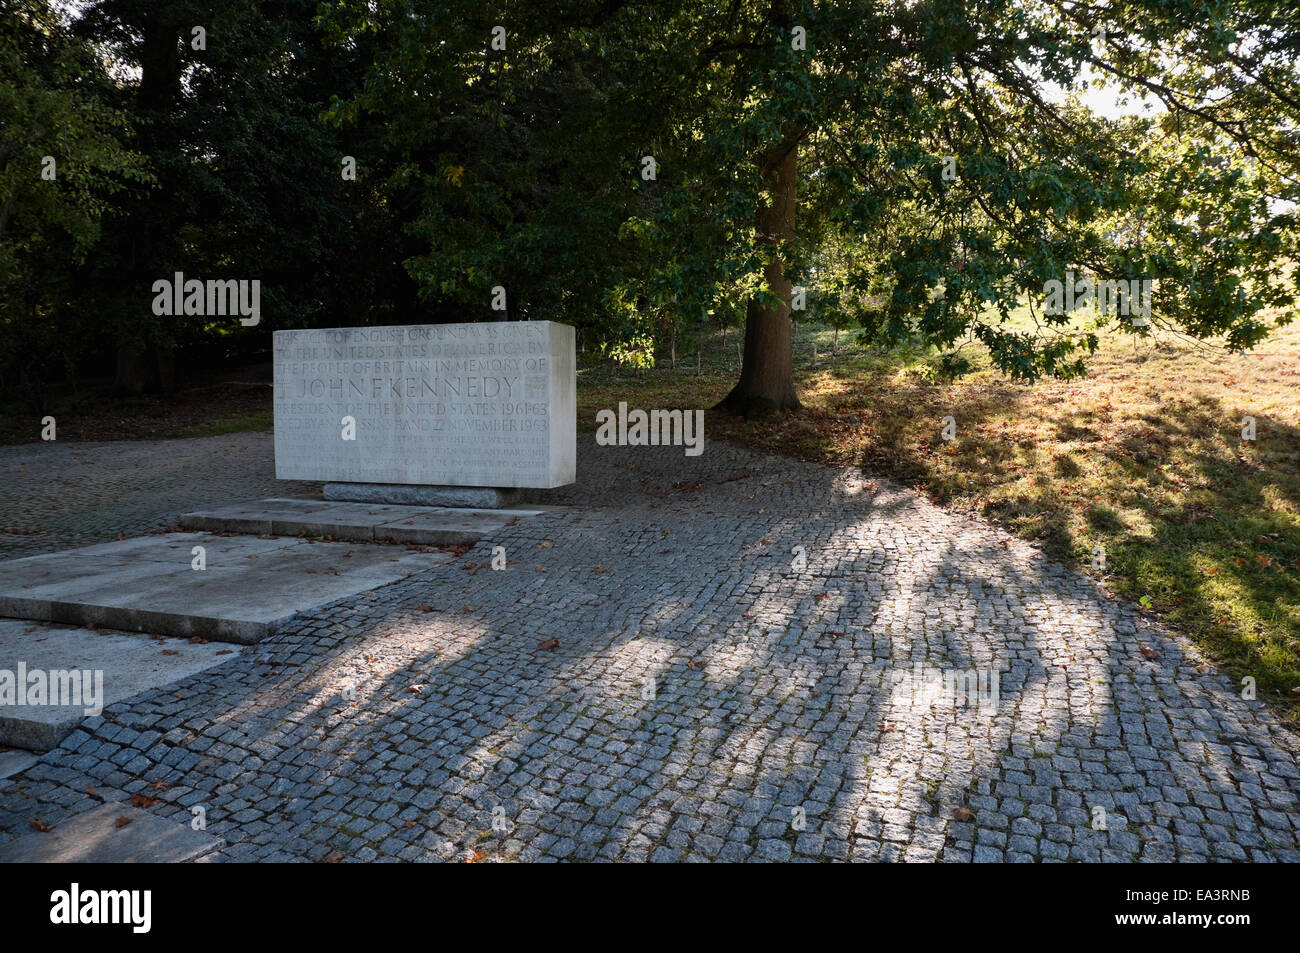 Memorial Stone to John F Kennedy together with an American Scarlet Oak Tree giving dappled light and shade, at Runnymede, UK. Stock Photo